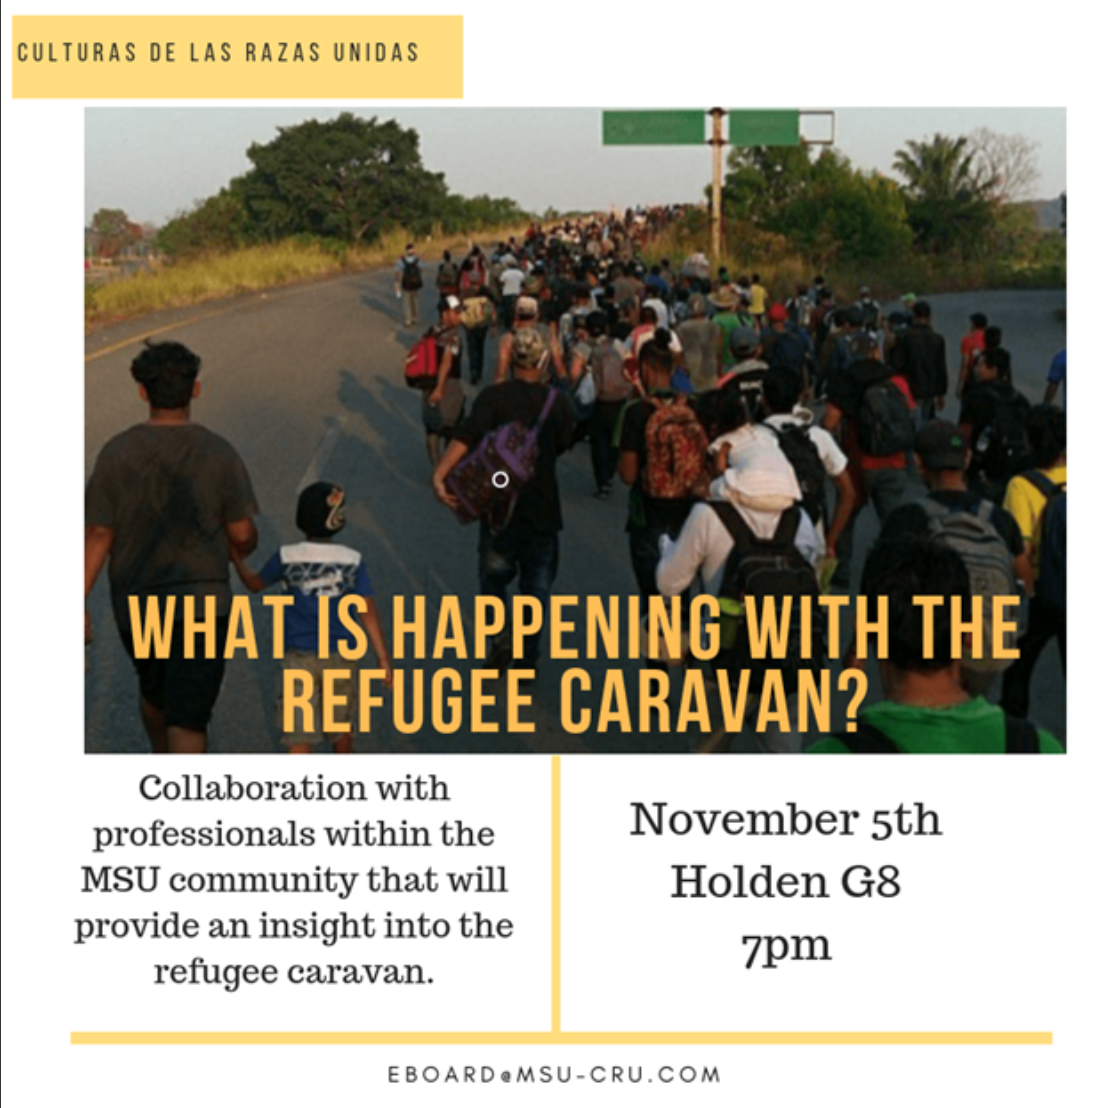 CRU: What is happening with the refugee caravan?